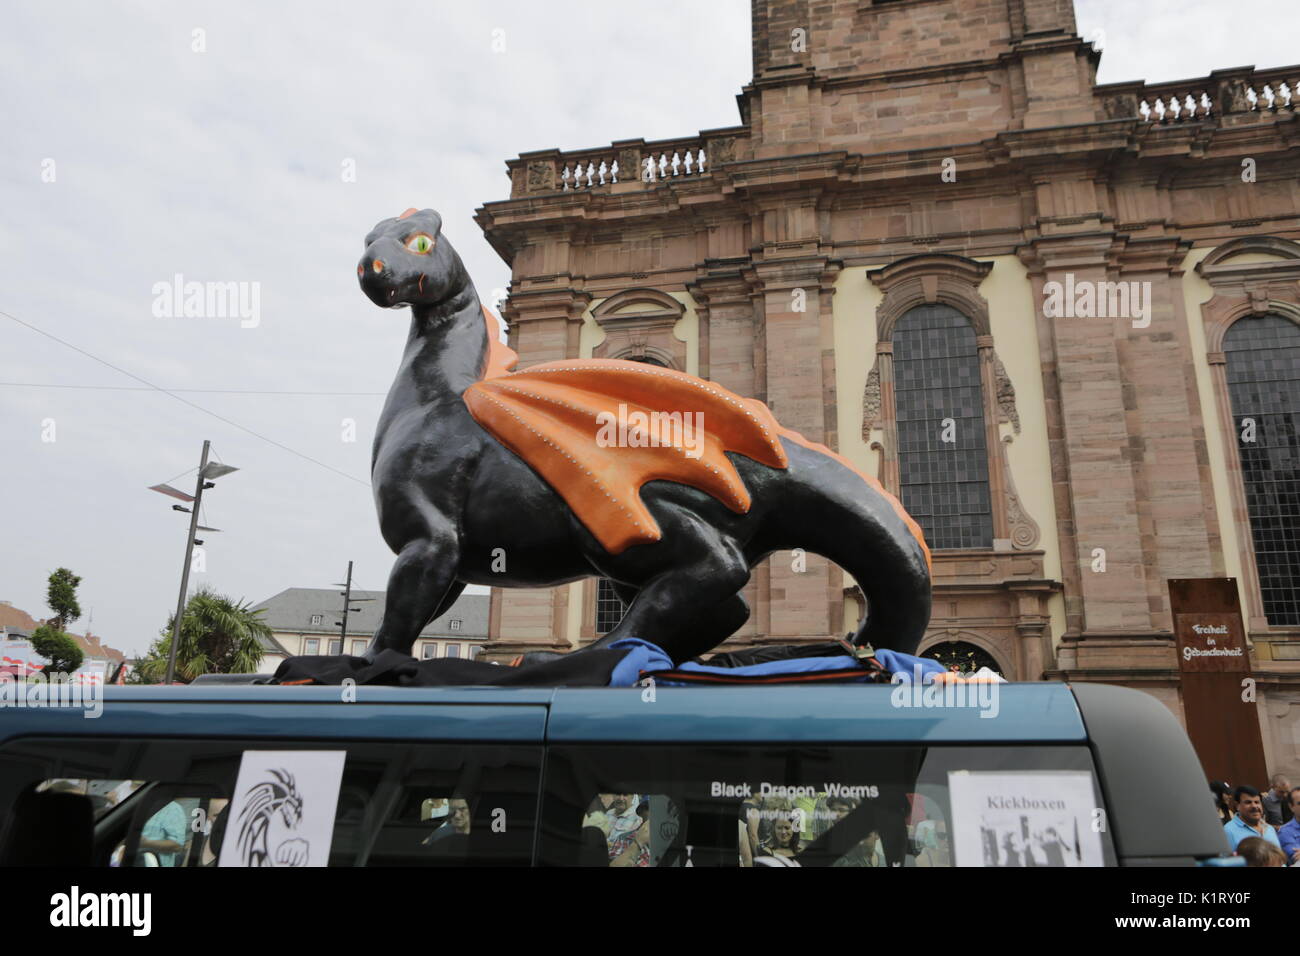 Worms, Germany. 27th August 2017. A large papier-mache dragon, the symbol of Worms, stands on top of a van. The first highlight of the 2017 Backfischfest was the big parade through the city of Worms with over 80 groups and floats. Community groups, music groups and business from Worms and further afield took part. Credit: Michael Debets/Alamy Live News Stock Photo